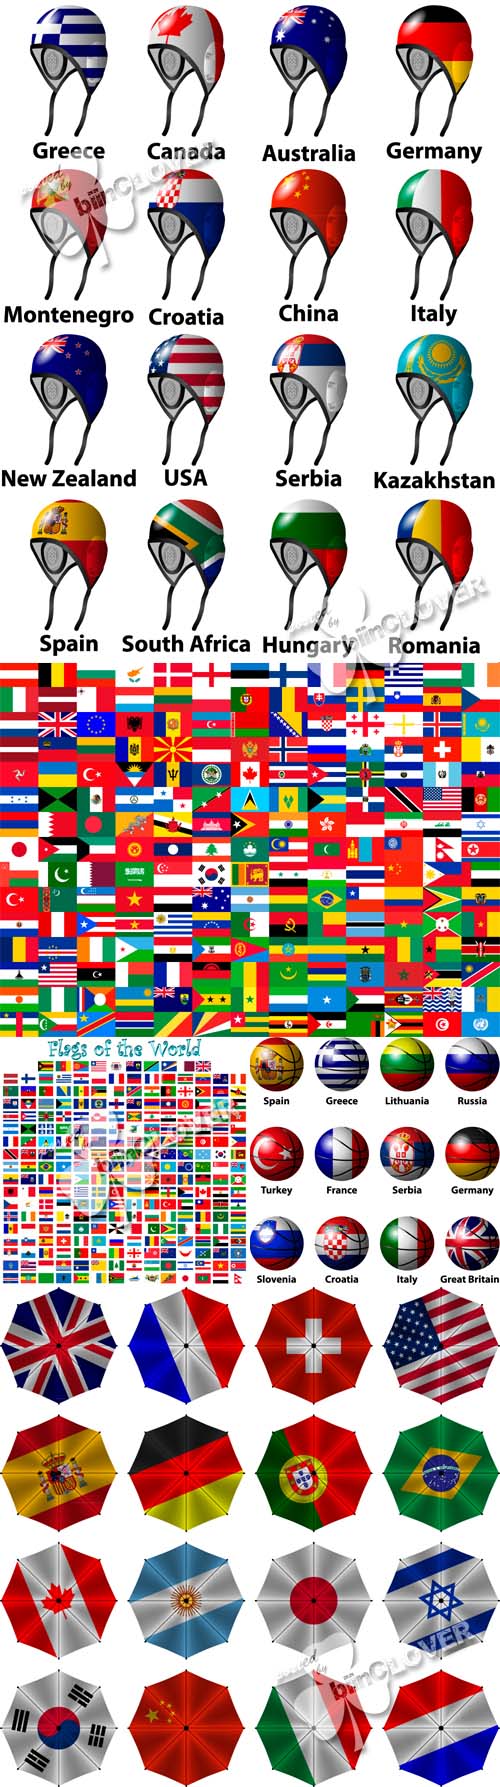 Flags of the world design 0457